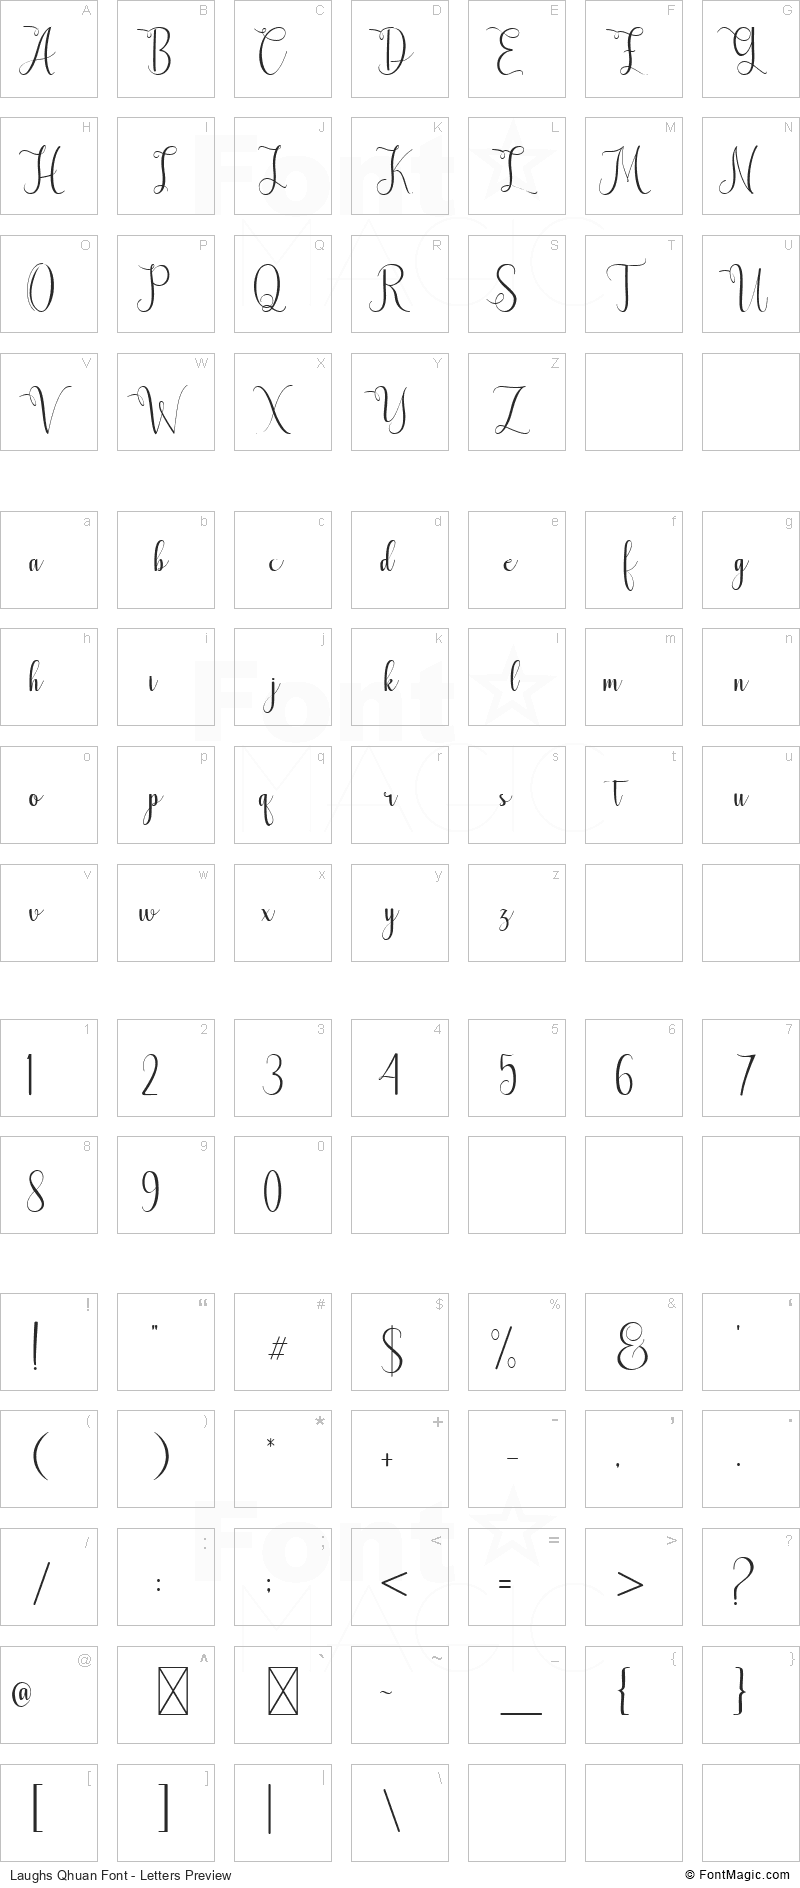 Laughs Qhuan Font - All Latters Preview Chart